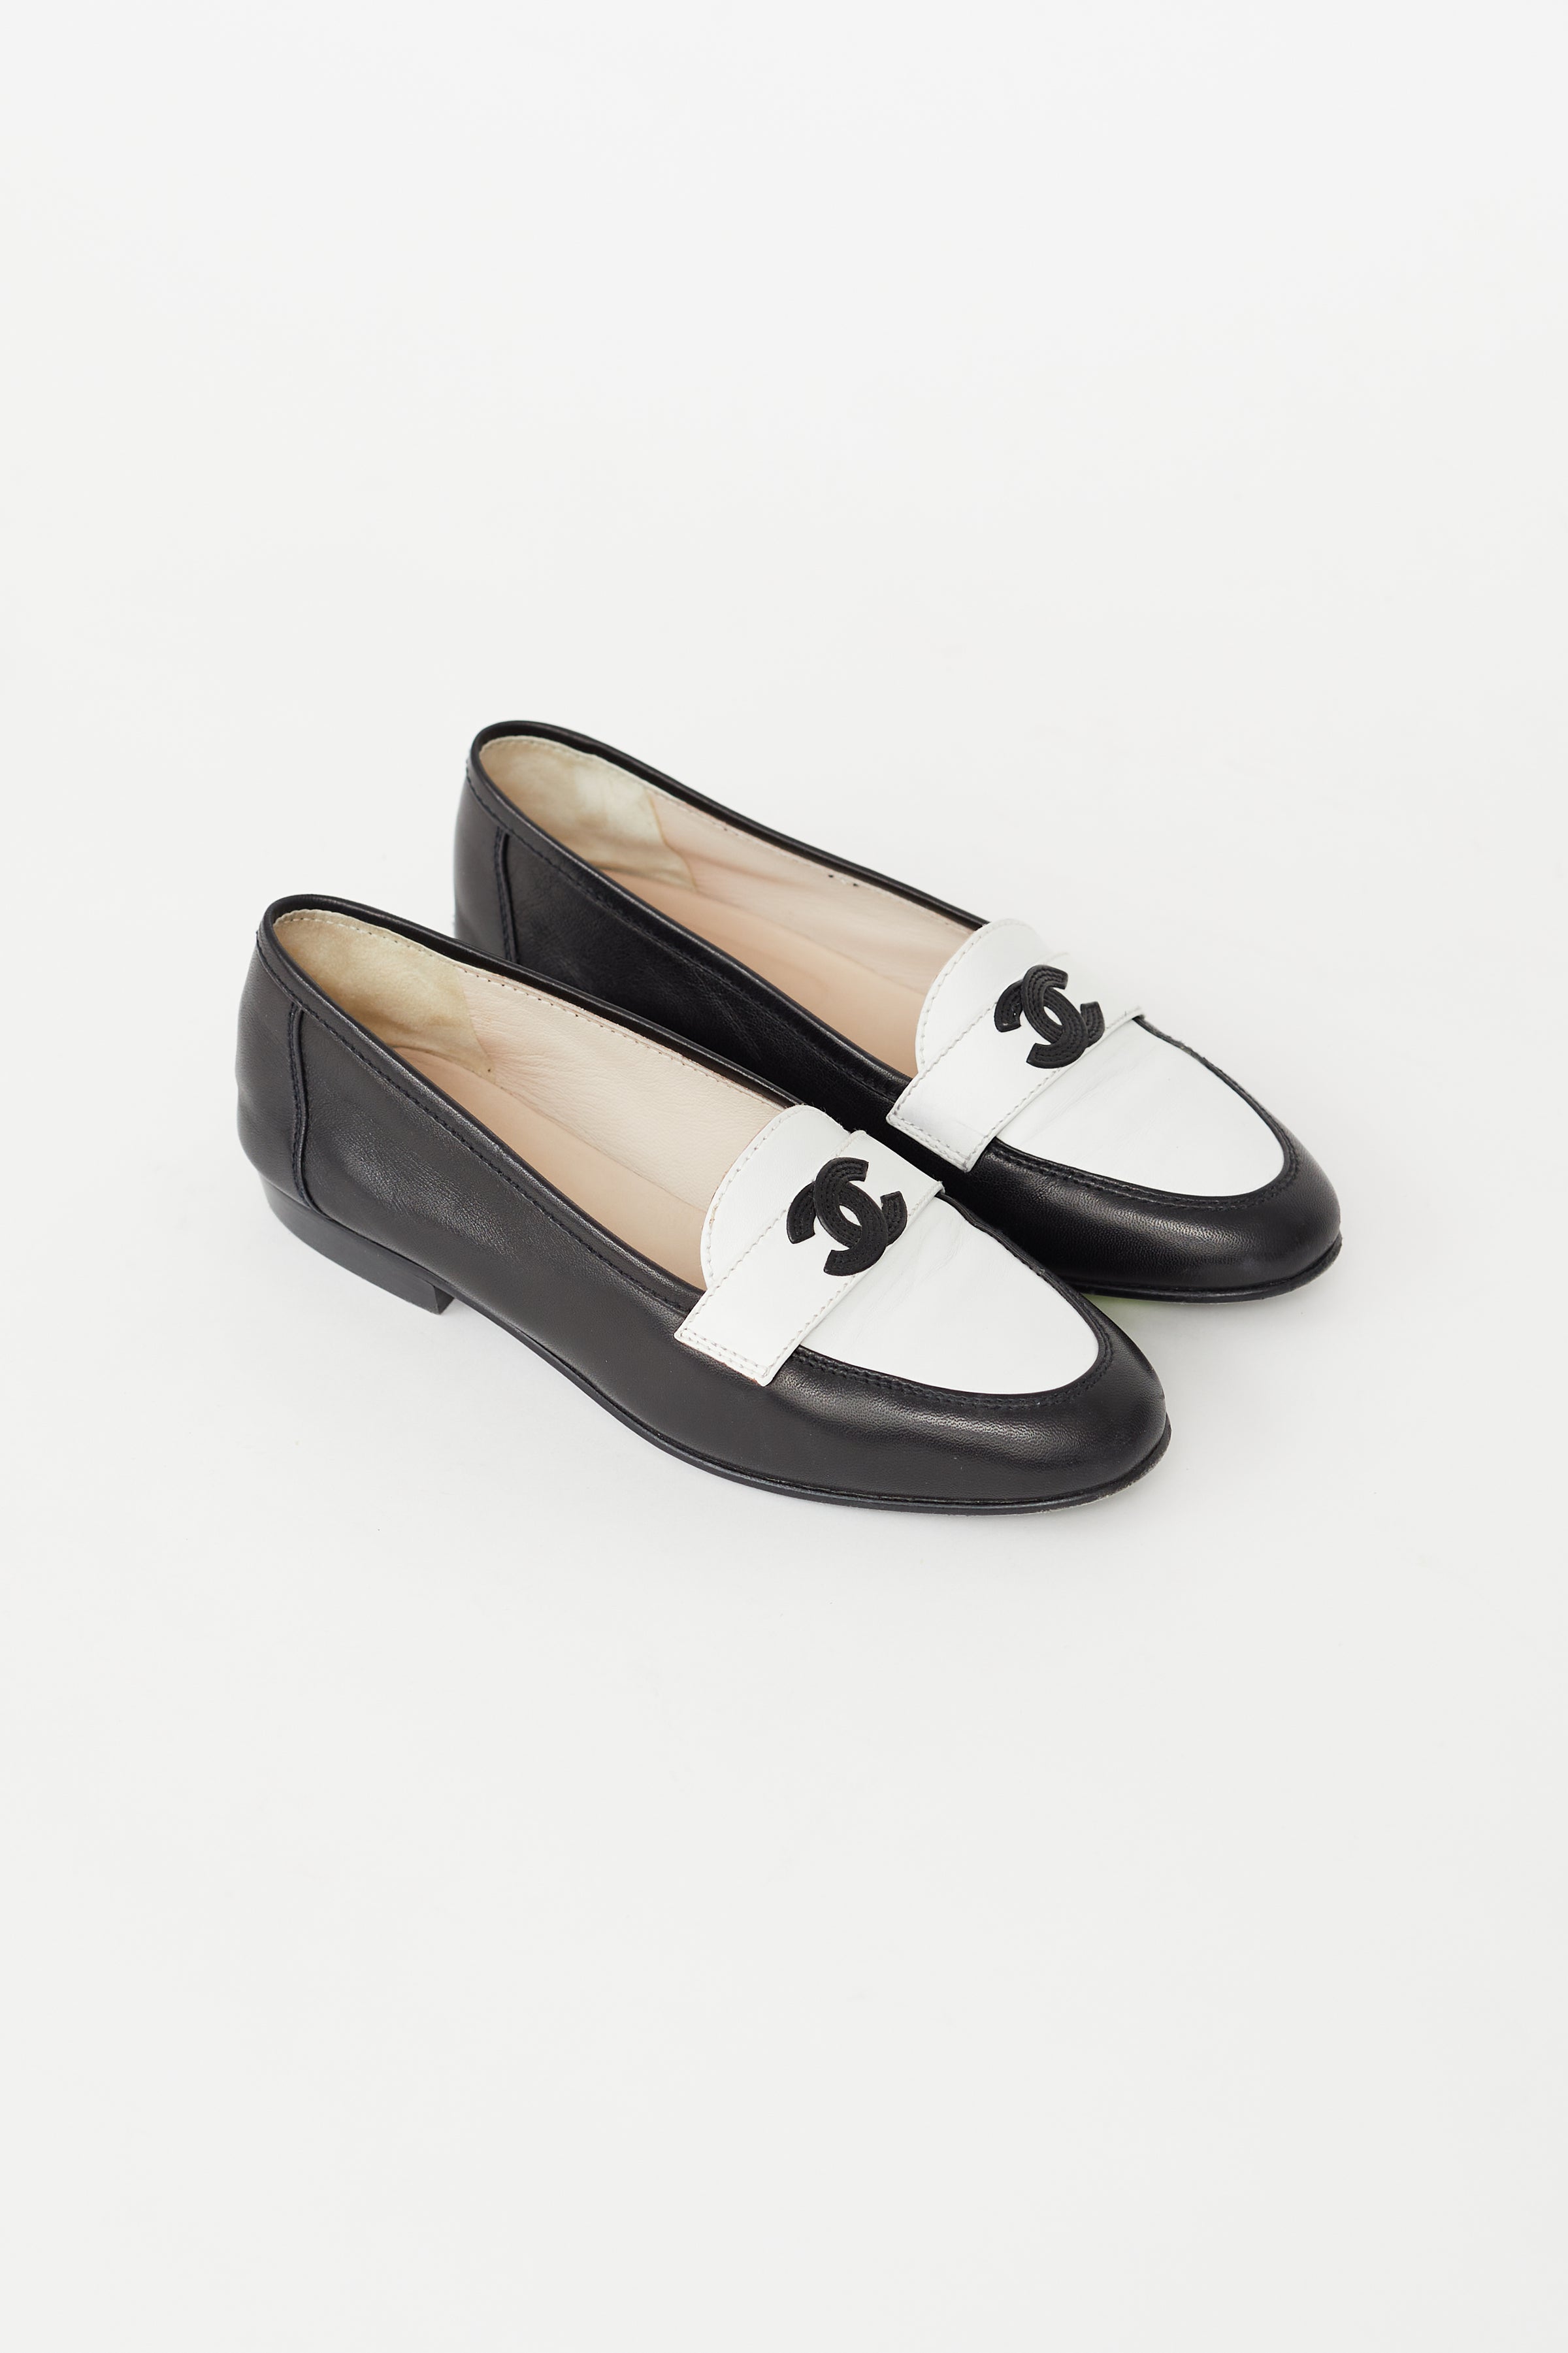 Chanel BlackWhite Patent Leather CC Chain Link Slip On Loafers Size 39   ShopStyle